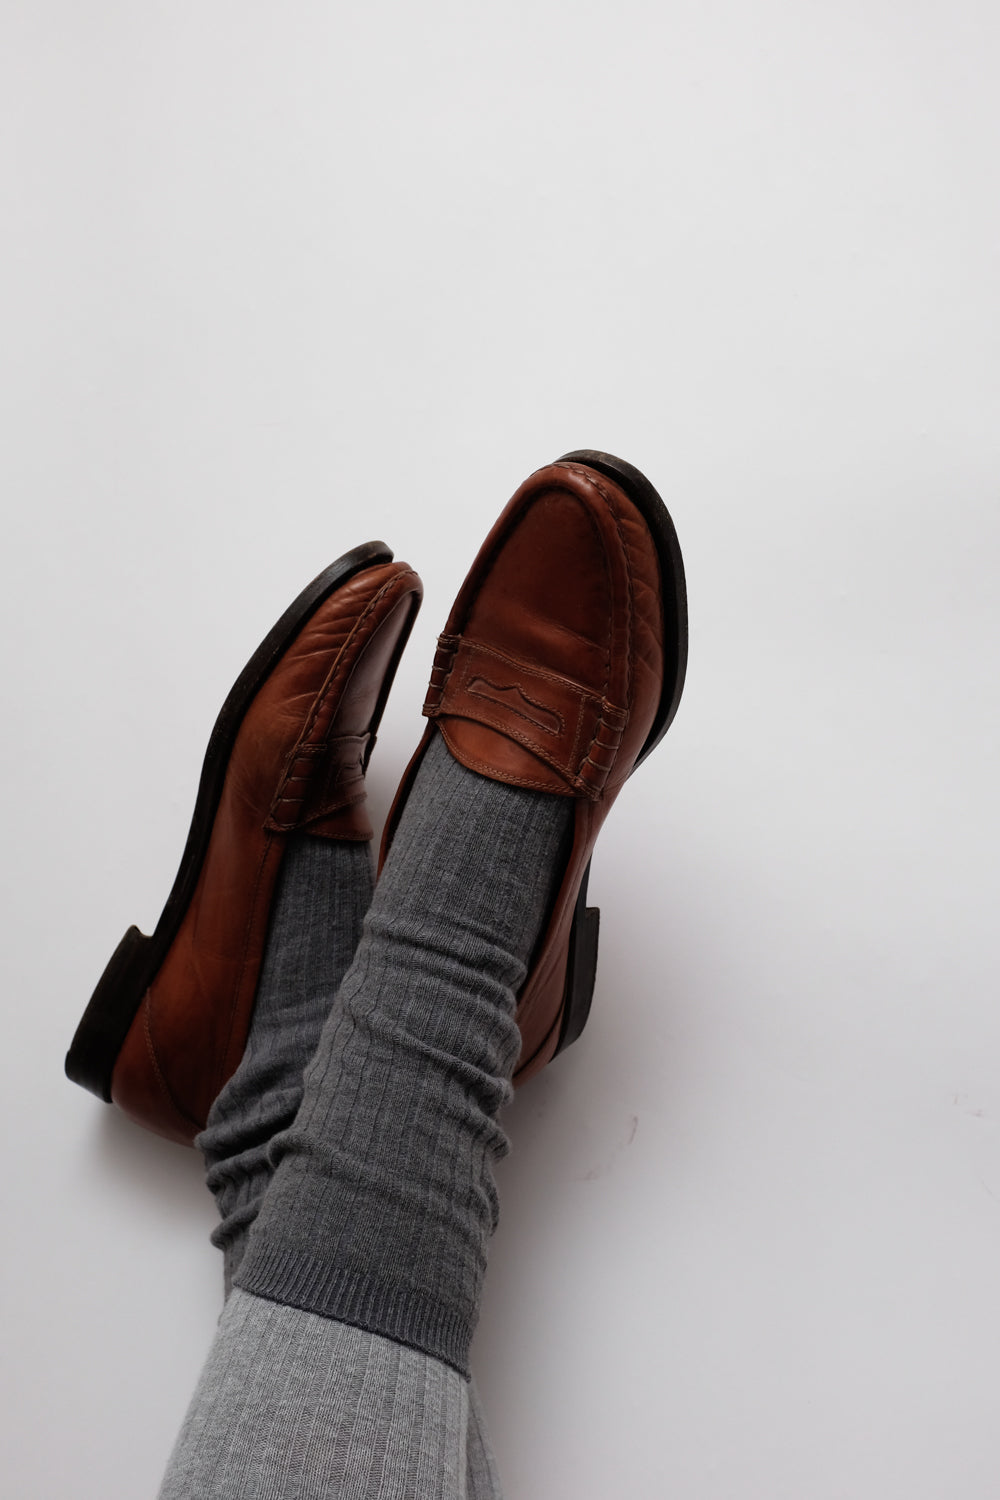 ITALY 40 BROWN VINTAGE LEATHER SLIPPER